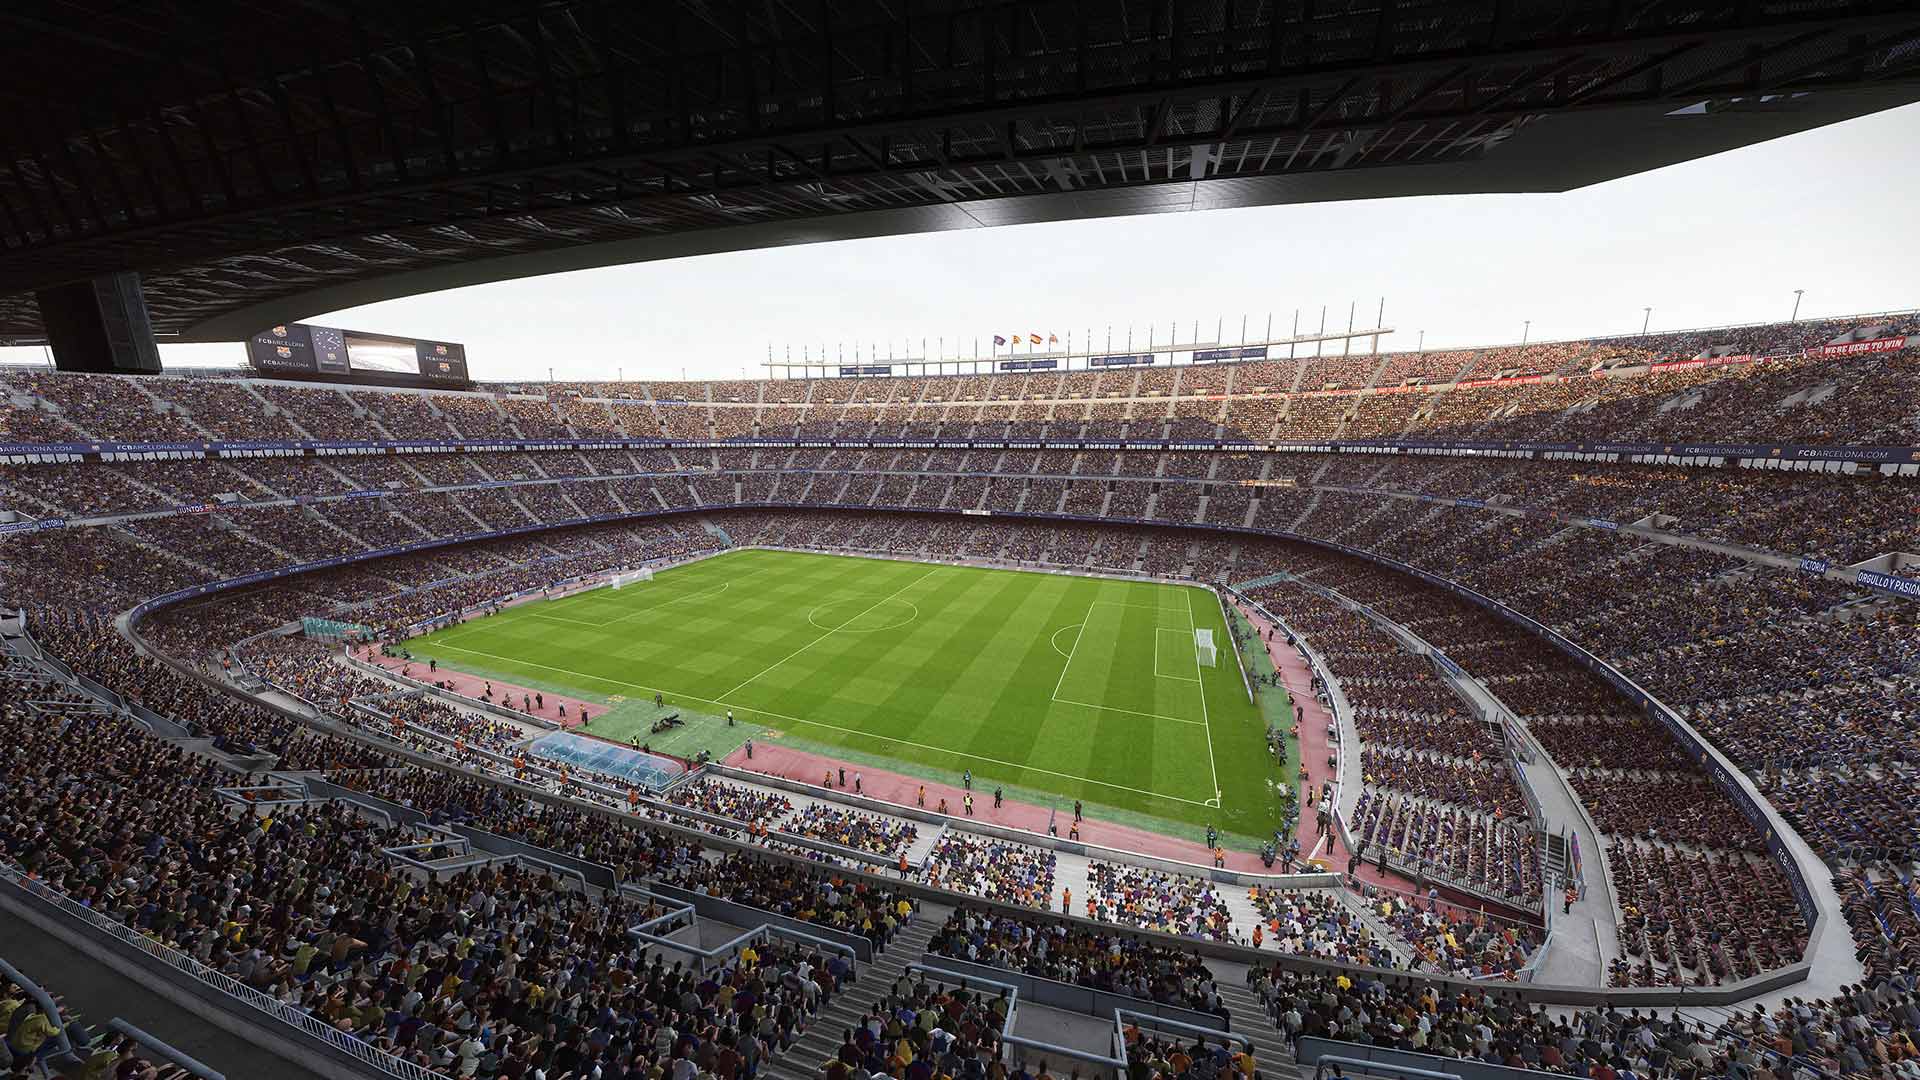 Image from PES 2020